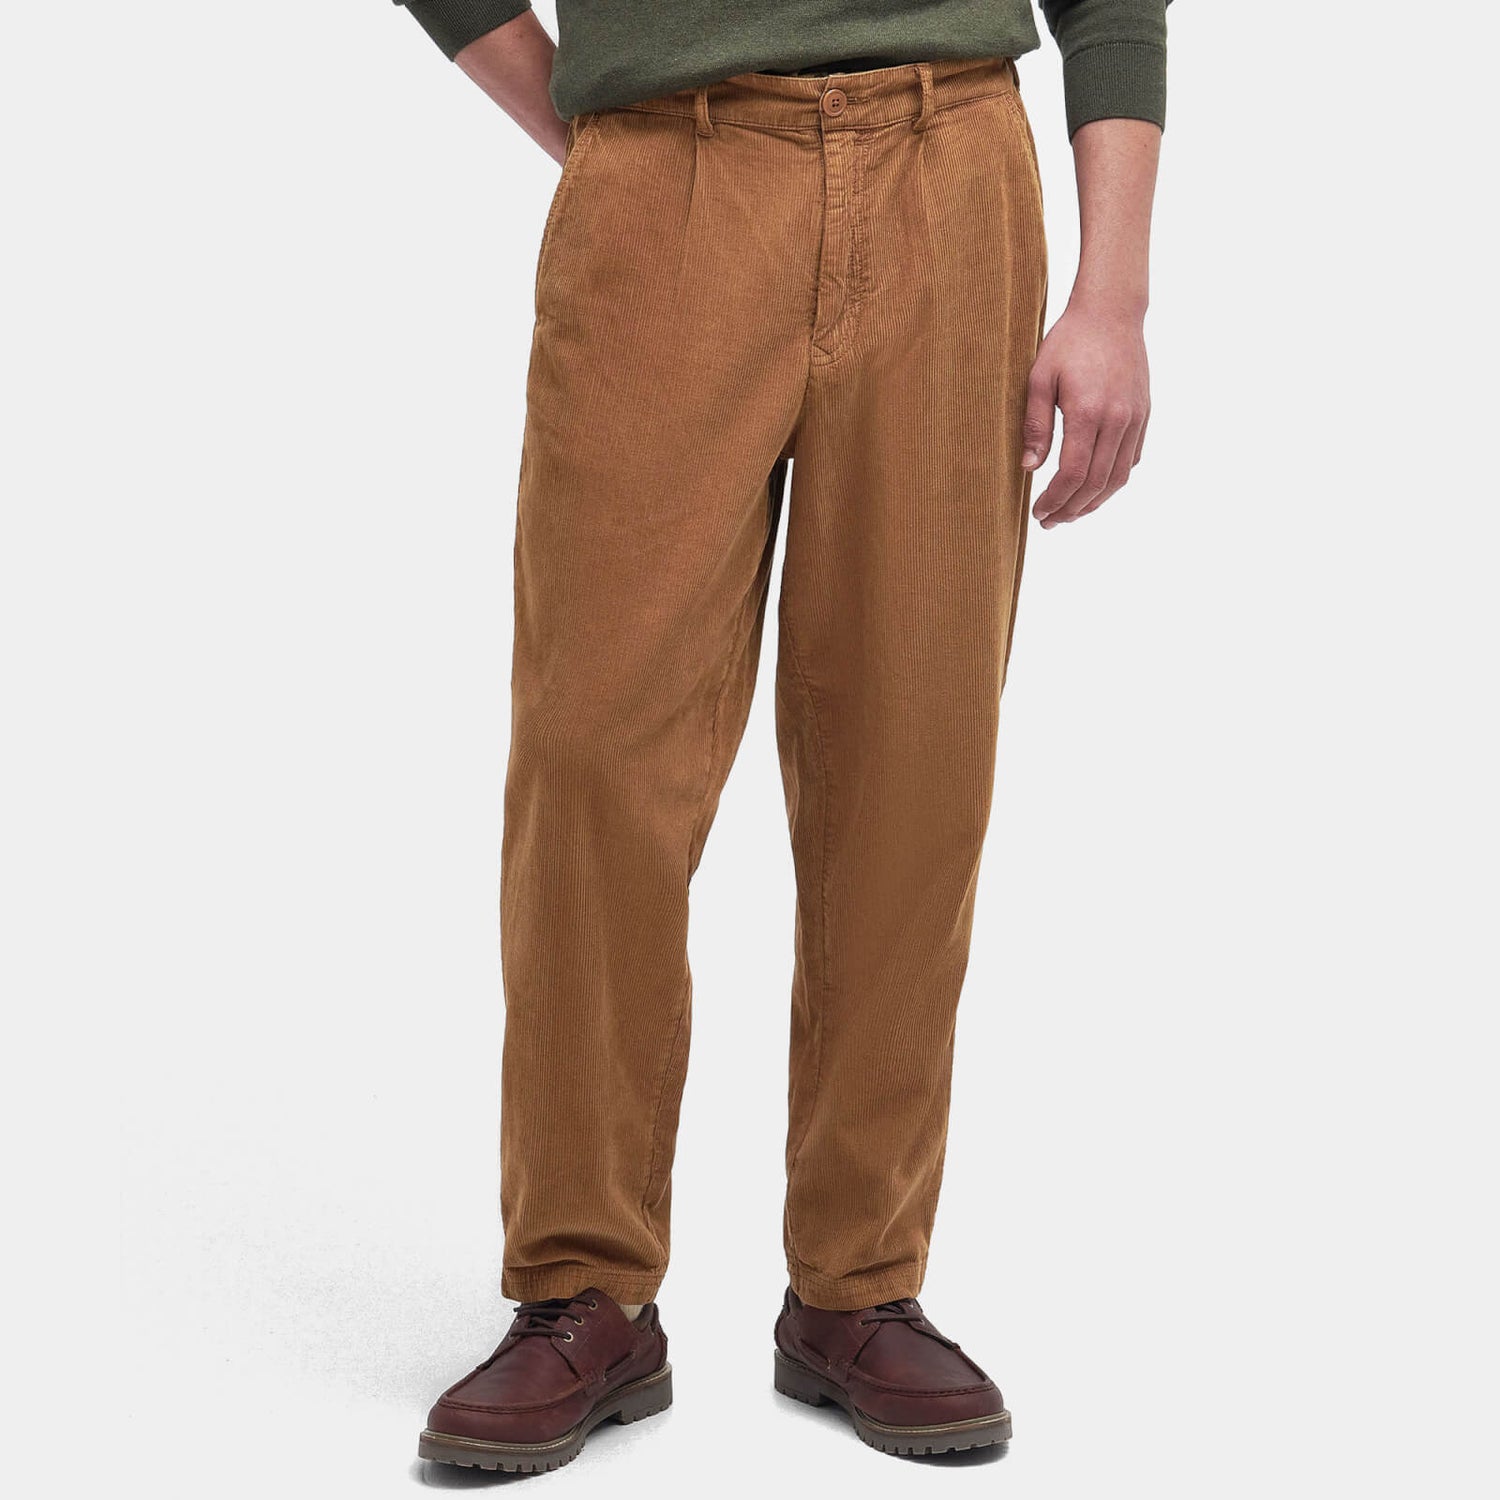 Barbour Heritage Spedwell Cotton Cordurory Trousers - S